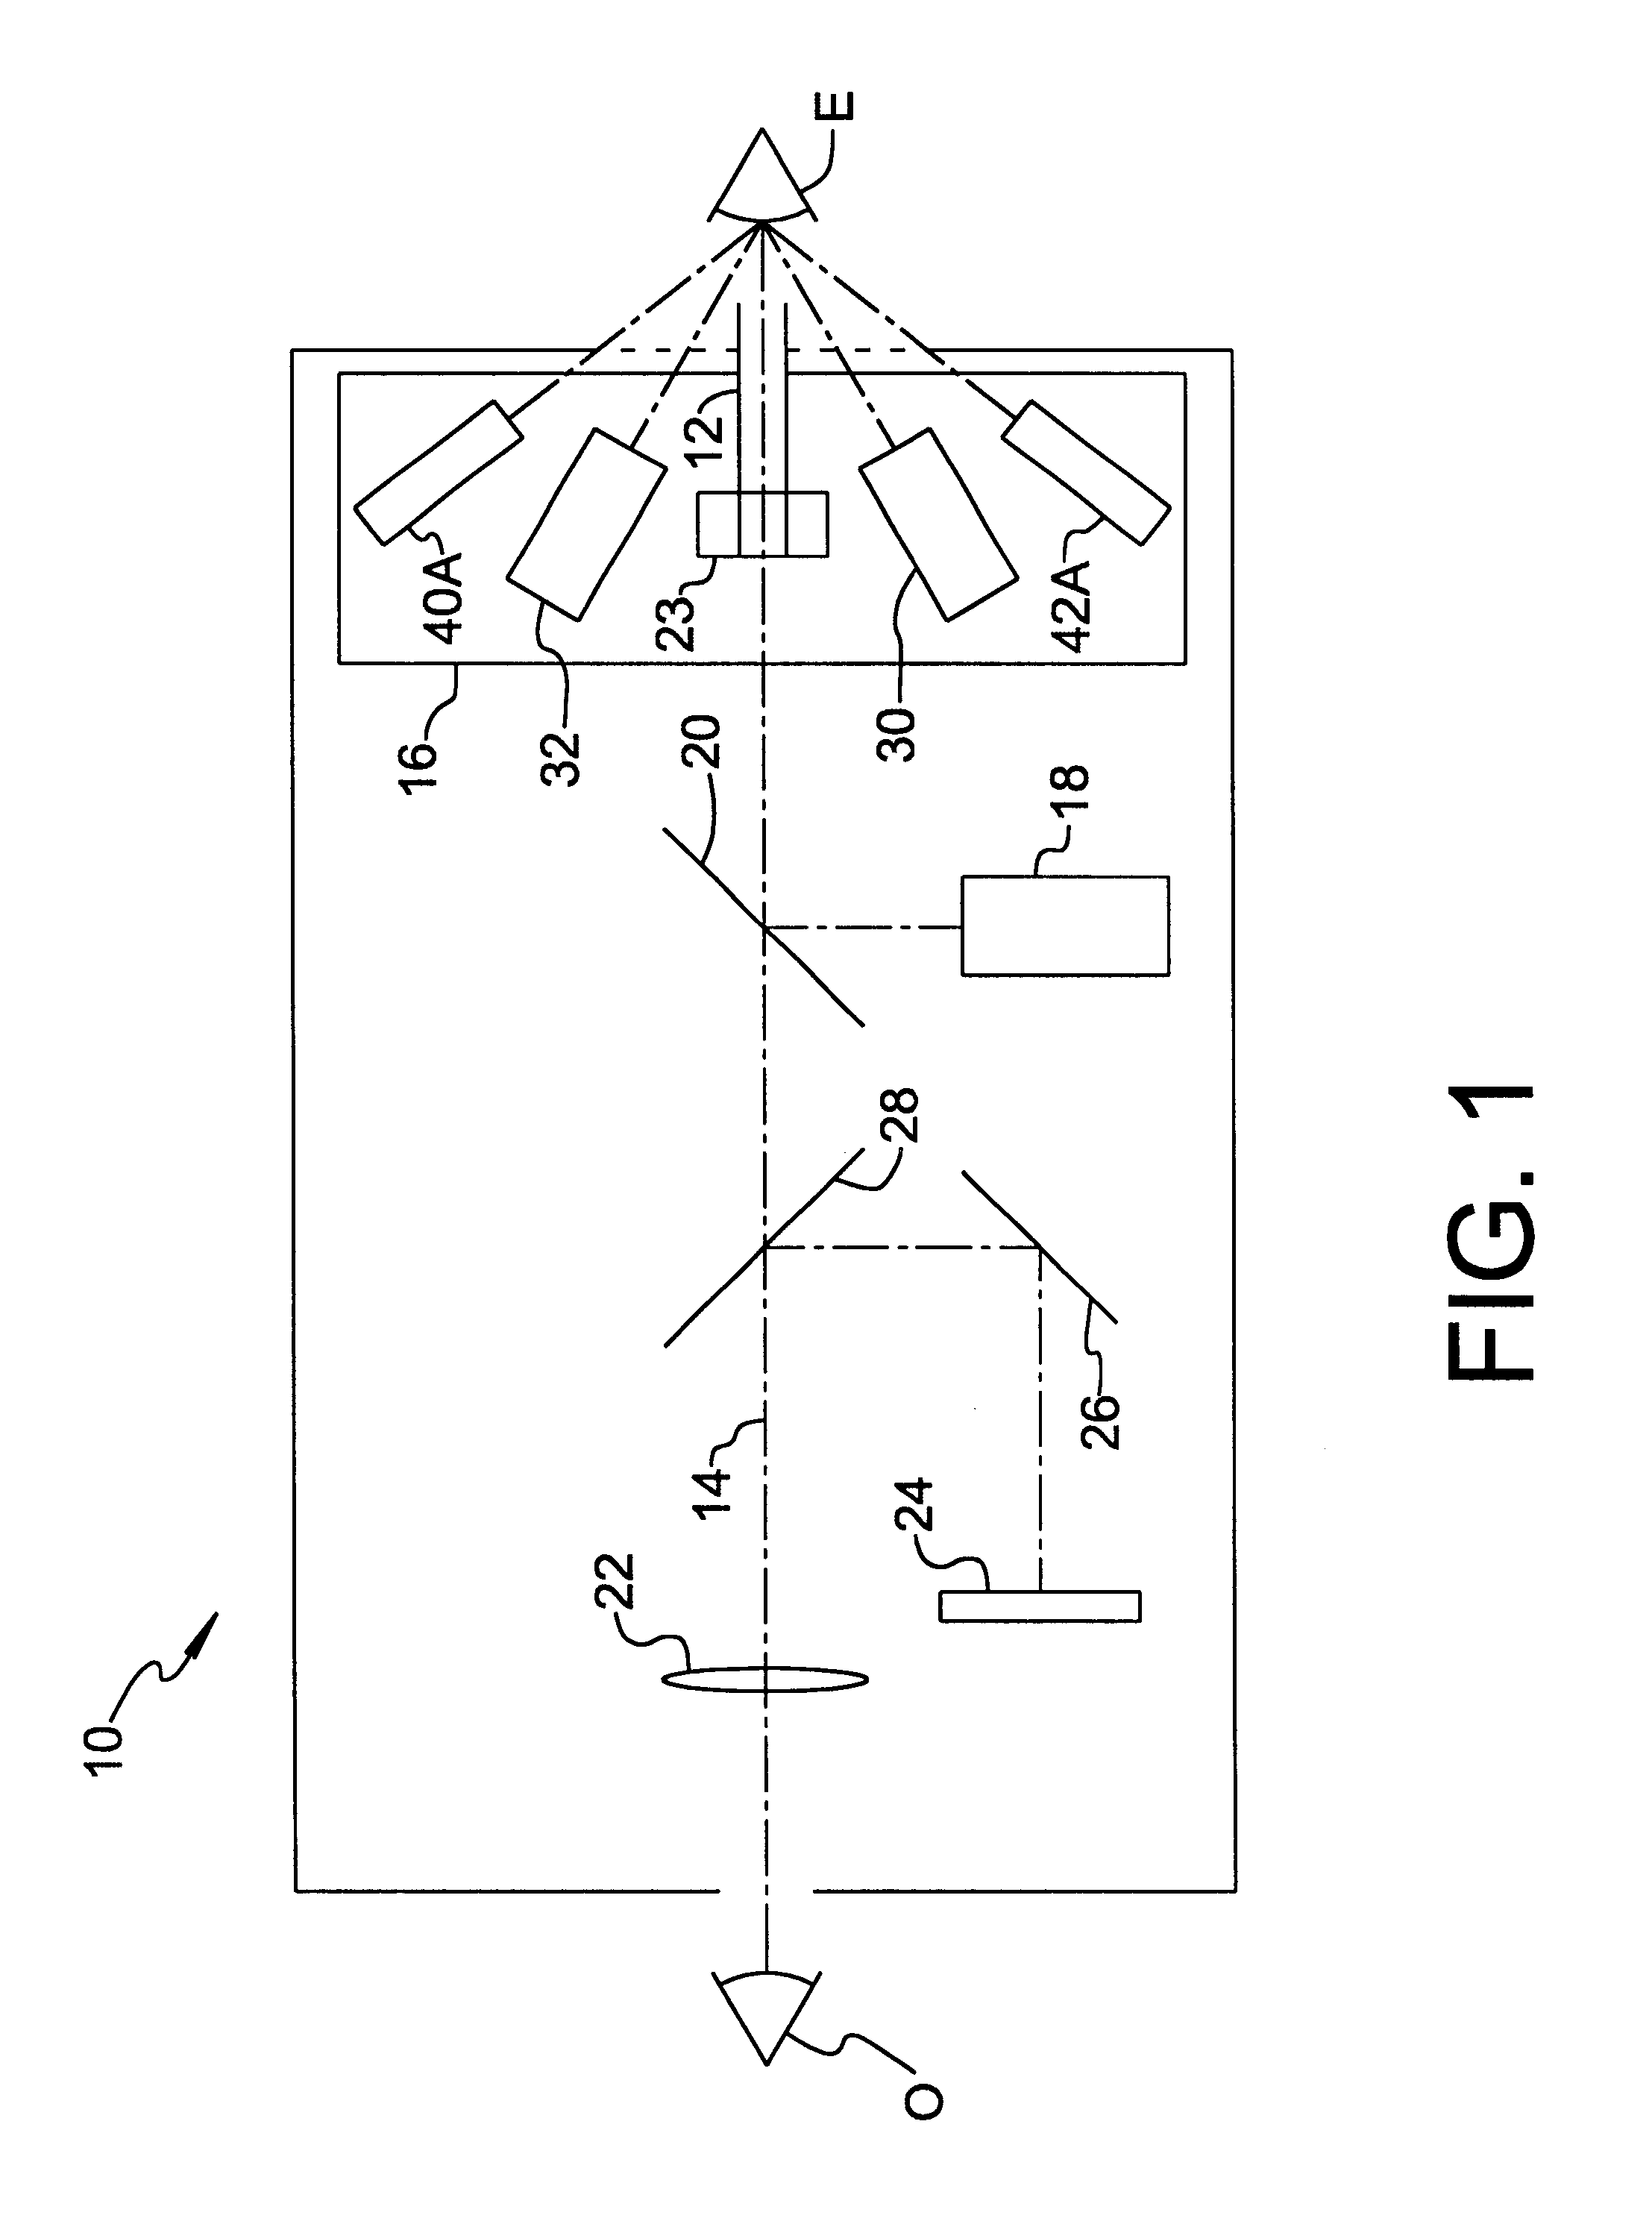 Afocal position detection system and ophthalmic instrument employing said system